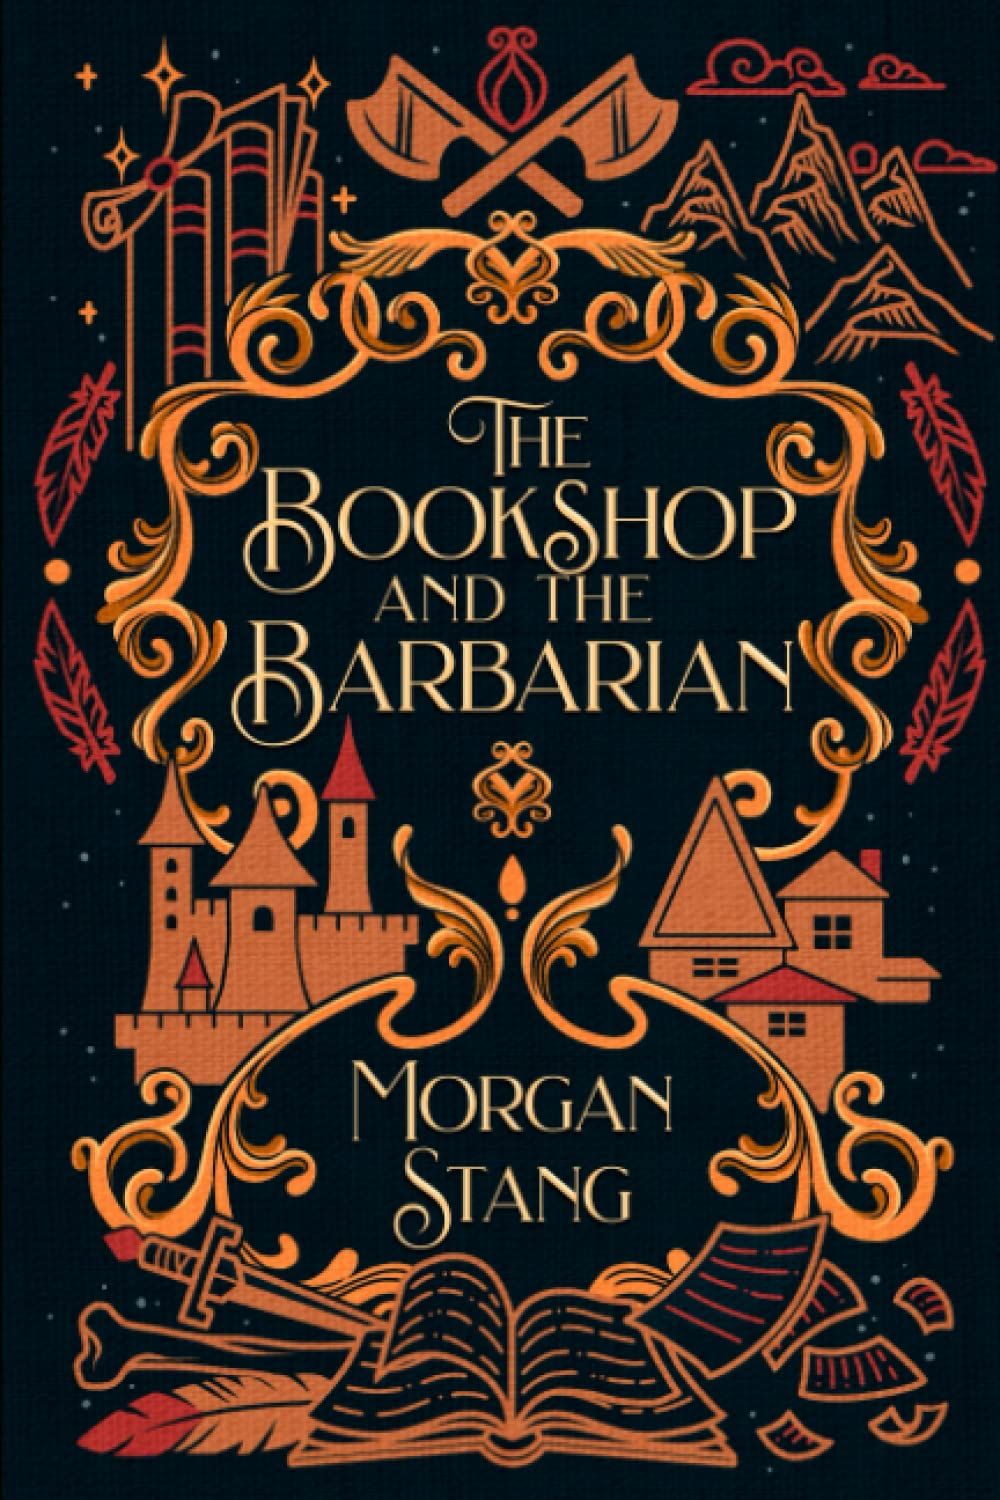 The Bookshop and the Barbarian book cover